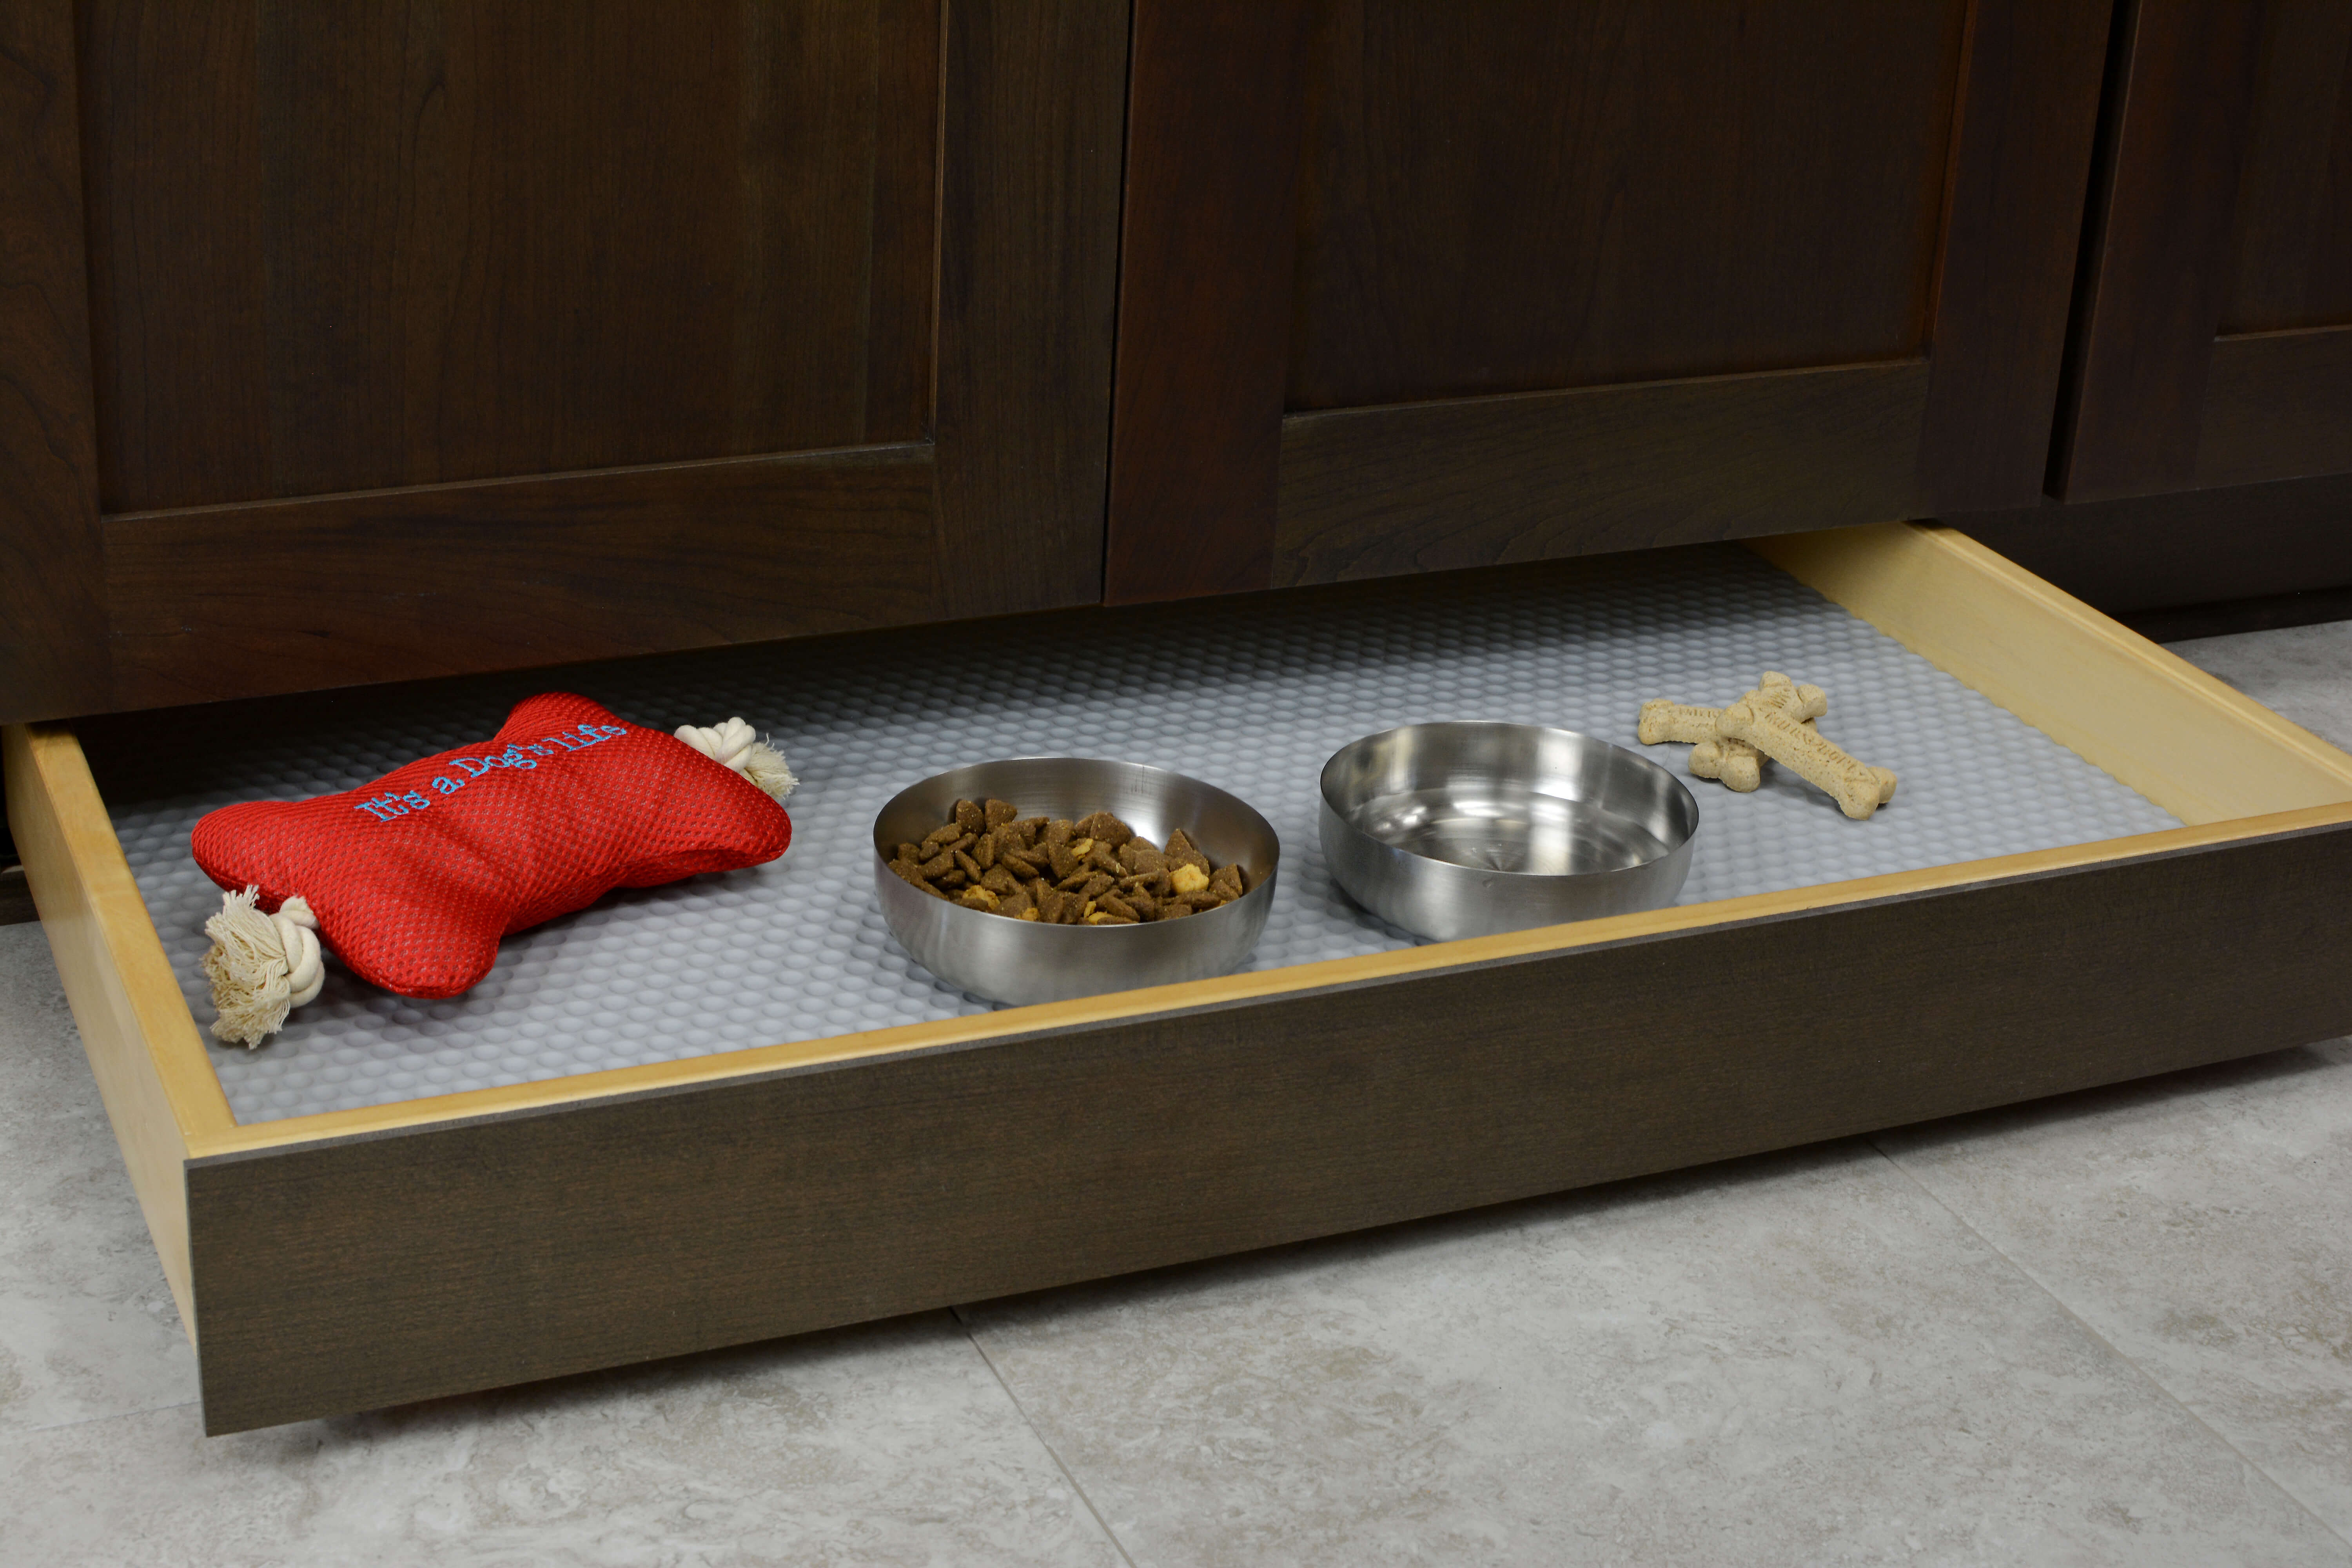 Miscellaneous items can find a home in a Dura Supreme Toe-Kick Drawer hidden at the foot of your cabinets. By adding a Dura Supreme Sink Mat you can create a treat station with toys, bones, and treats for your furry friend. Please note, this is a shallow drawer and can not fit standard depth feeding dishes.